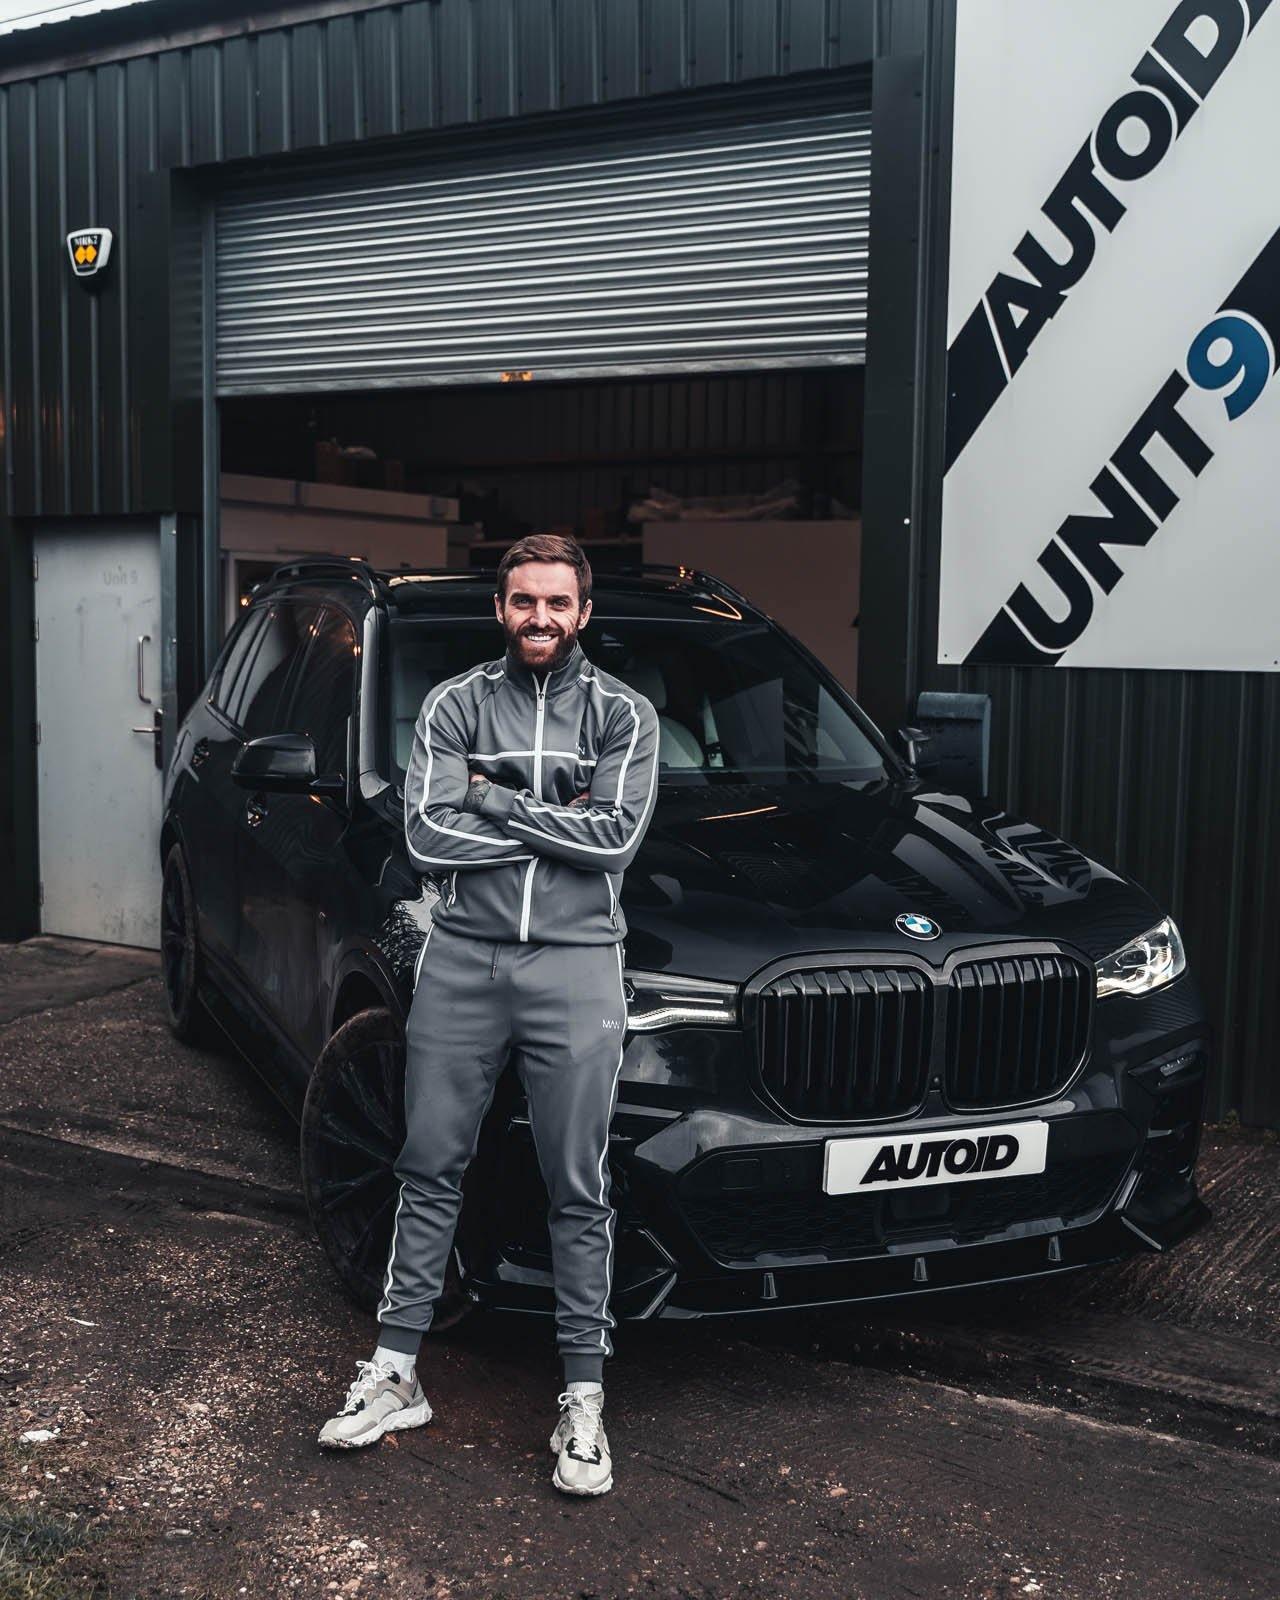 This BMW X7 is TRANSFORMED. - AUTOID